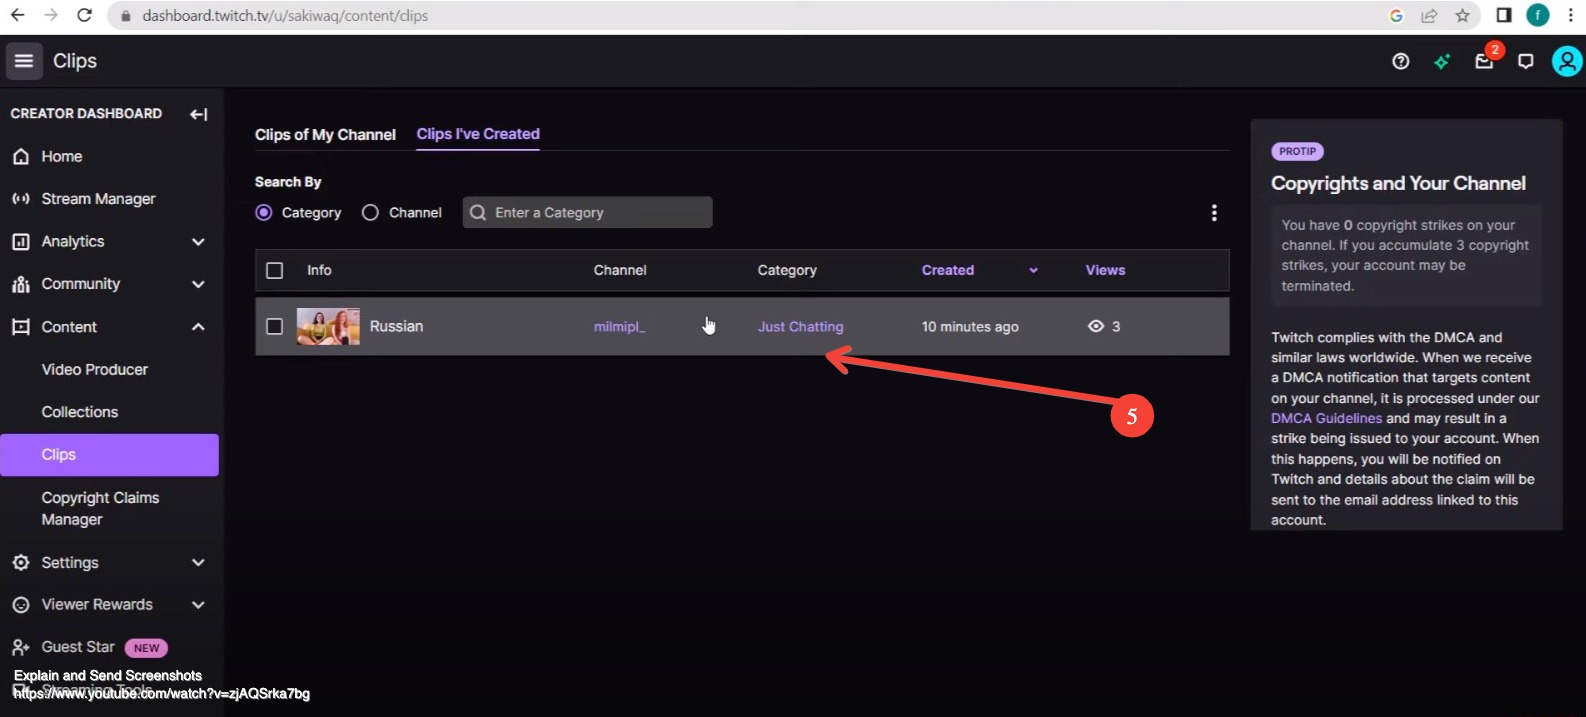  Twitch Clip Downloader guide